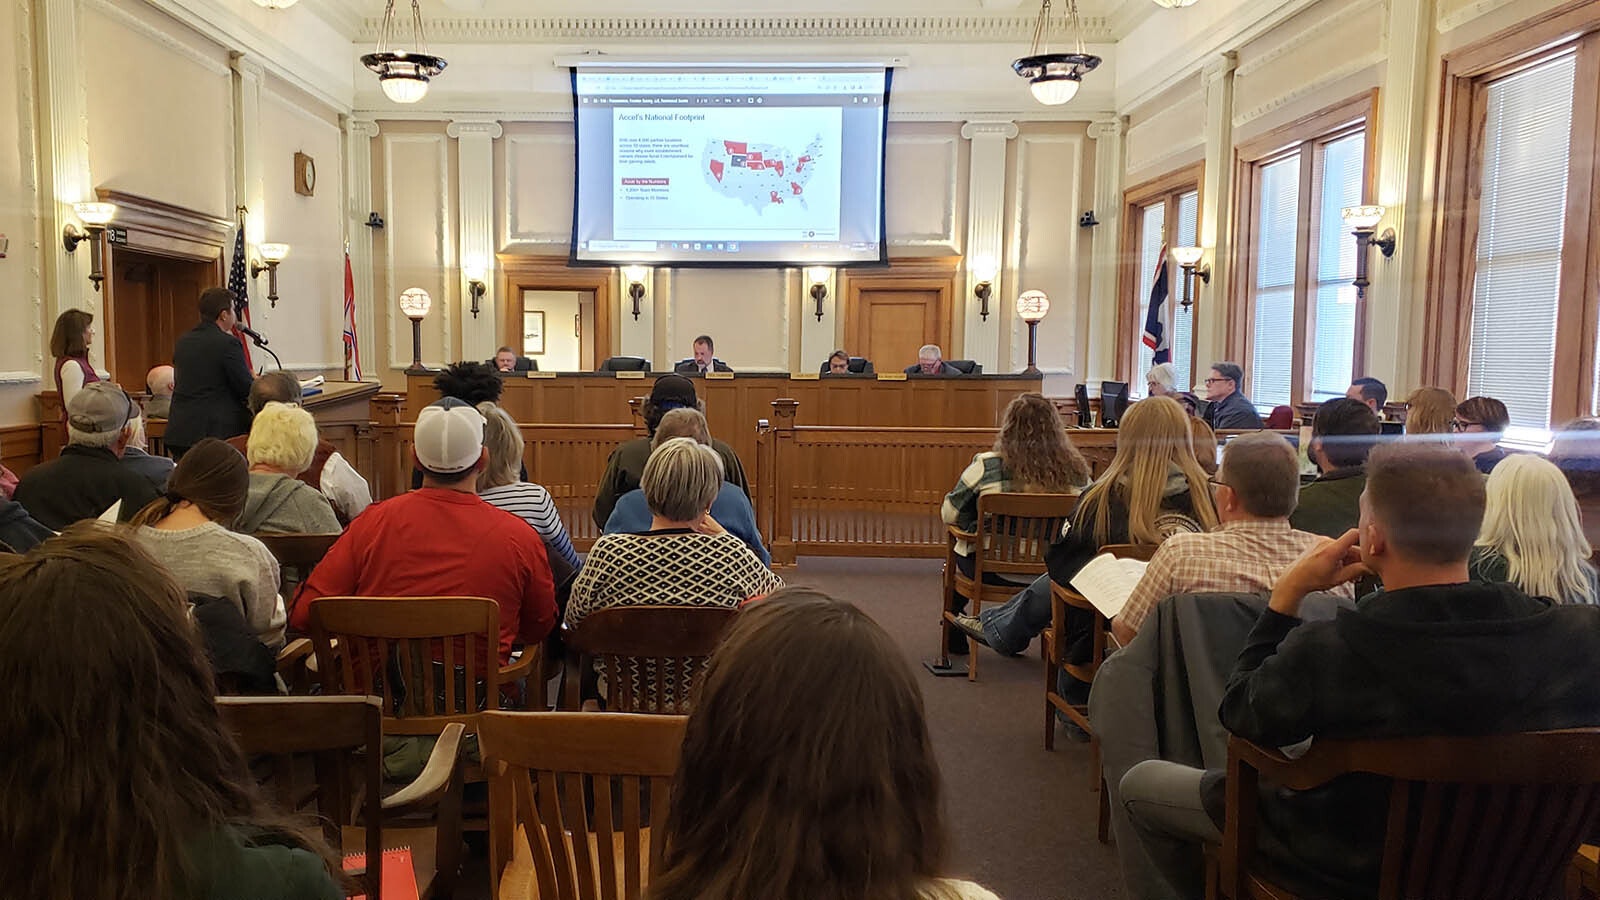 A full house was present for a hearing into a proposal to add horse racing to Cheyenne Frontier Days.